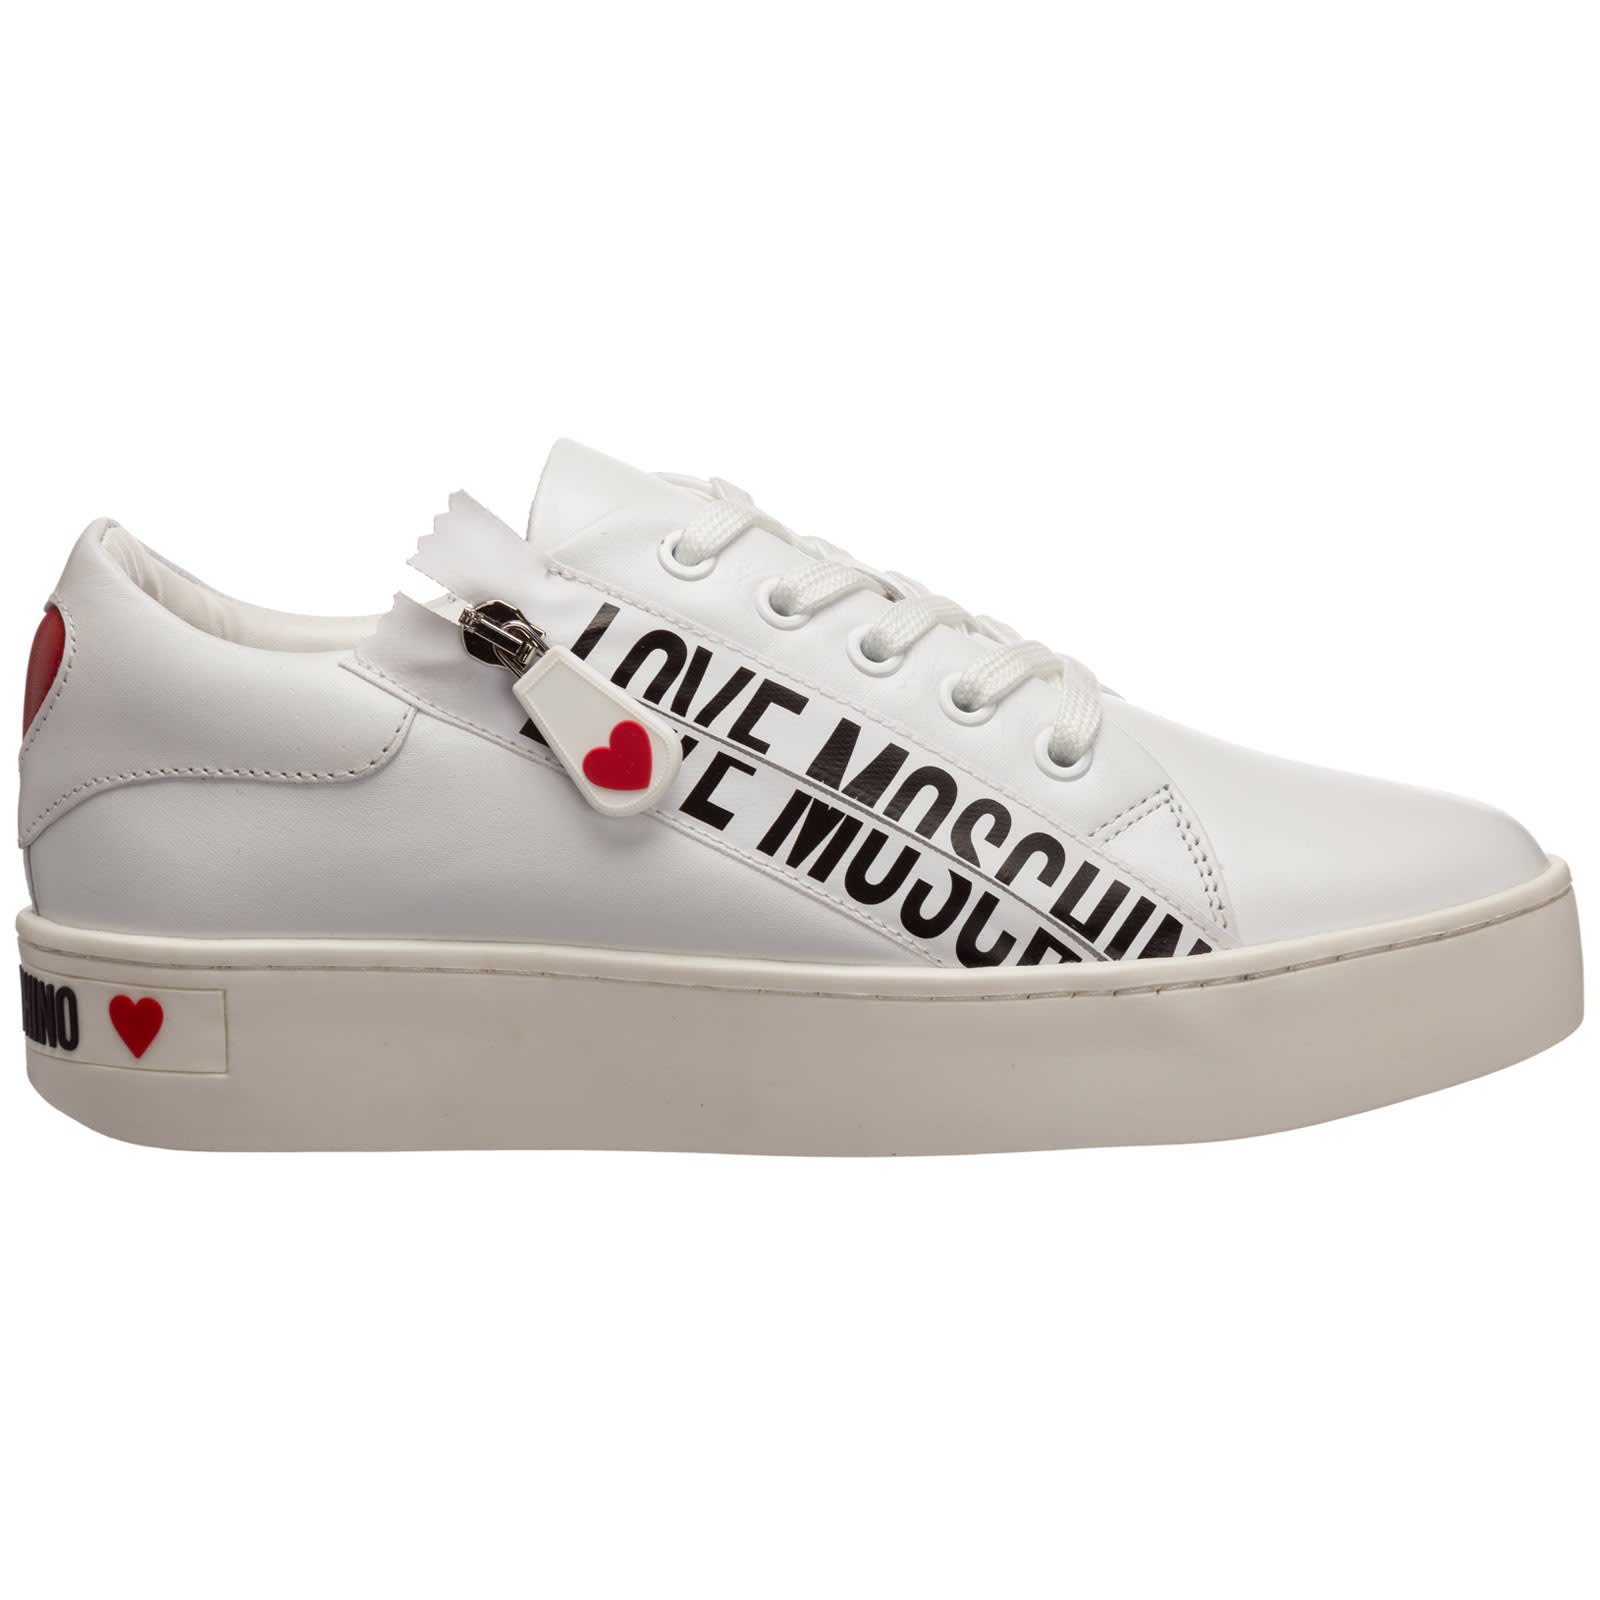 Buy Love Moschino Rebel Sneakers online, shop Love Moschino shoes with free shipping